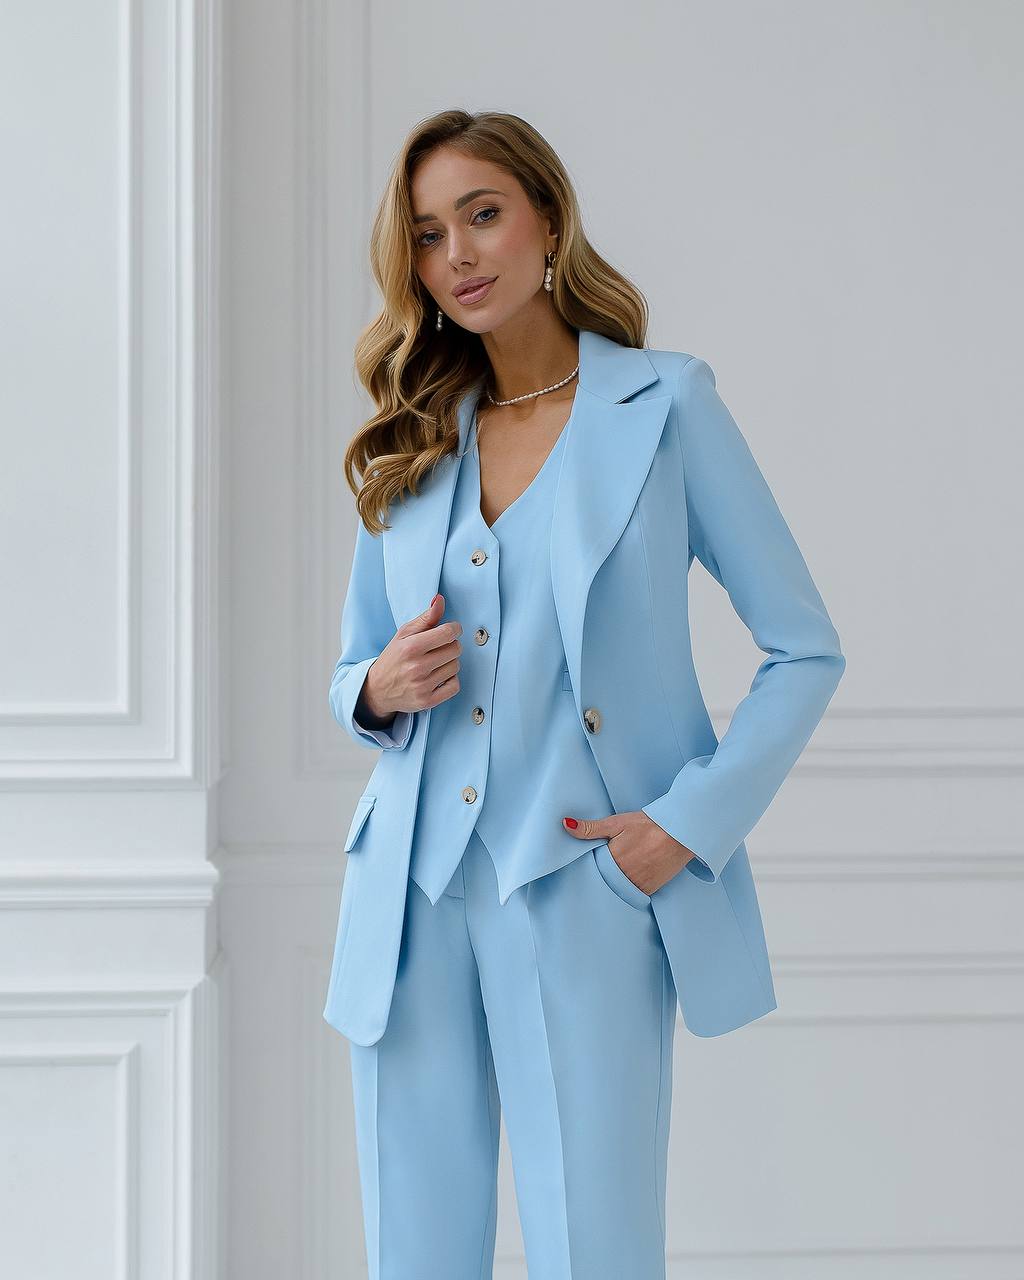 a woman in a light blue suit posing for a picture